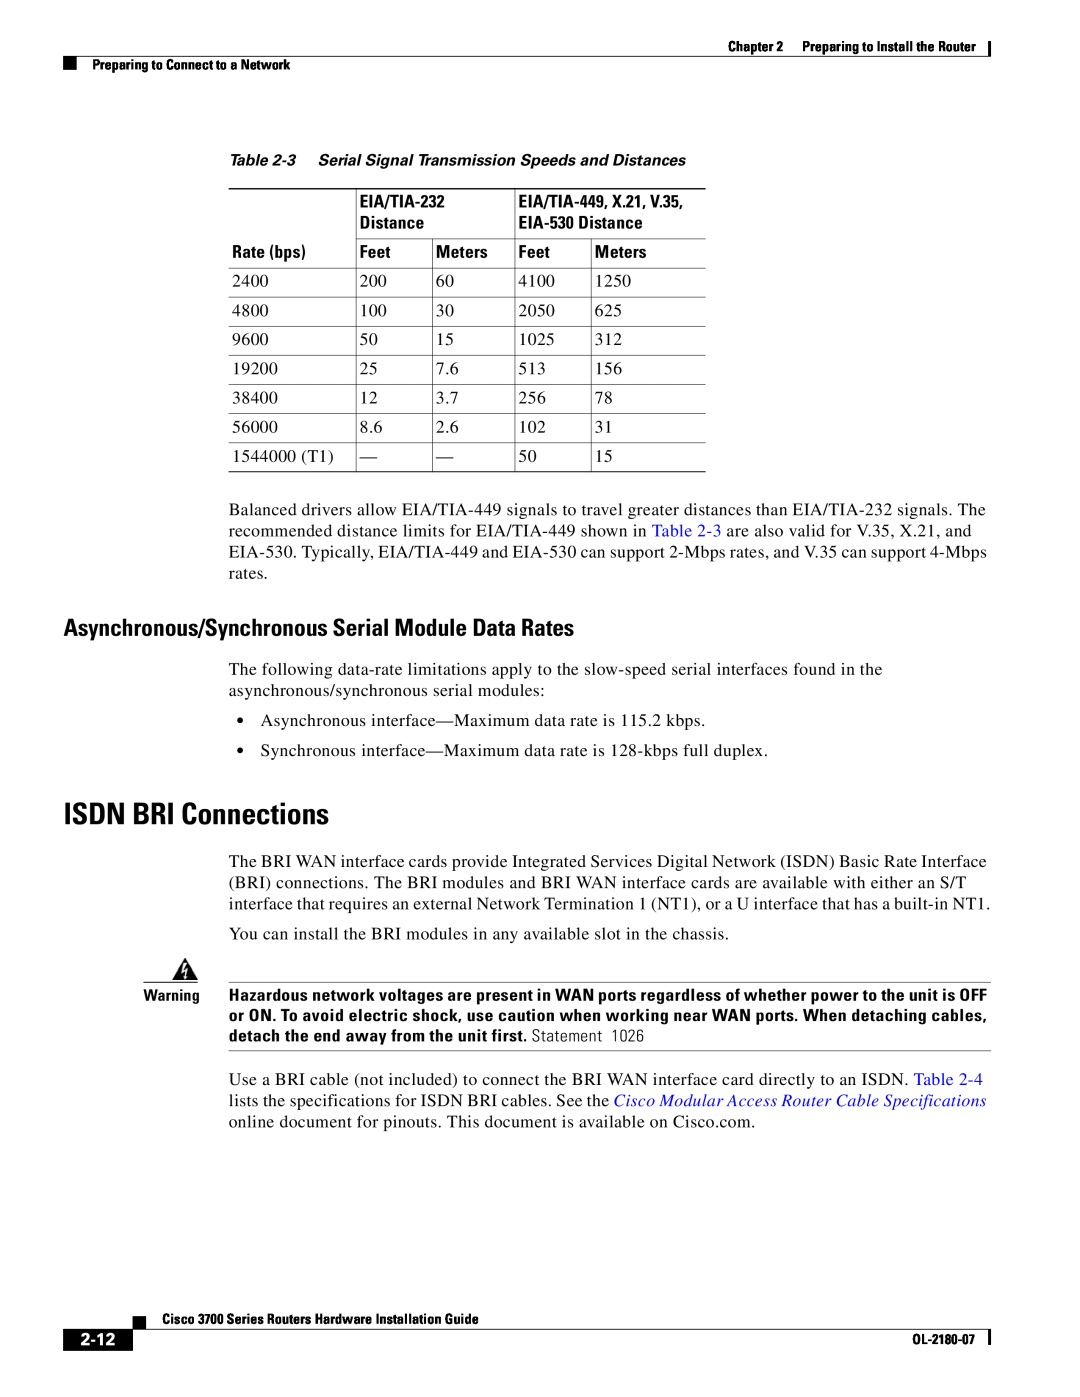 Cisco Systems 3700 Series manual ISDN BRI Connections, Asynchronous/Synchronous Serial Module Data Rates, 2-12 